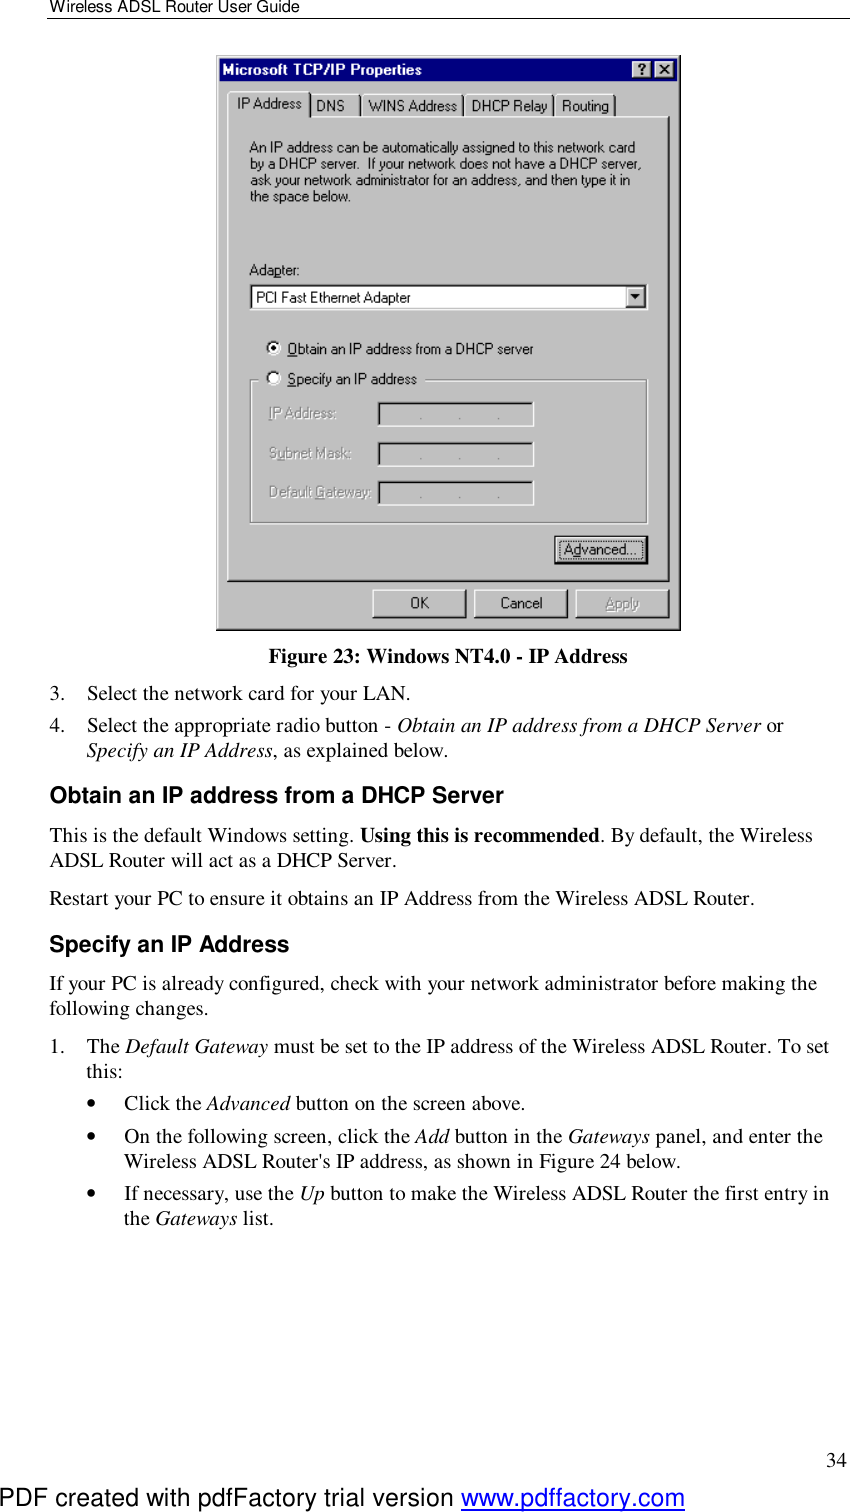 Wireless ADSL Router User Guide 34  Figure 23: Windows NT4.0 - IP Address 3. Select the network card for your LAN. 4. Select the appropriate radio button - Obtain an IP address from a DHCP Server or Specify an IP Address, as explained below. Obtain an IP address from a DHCP Server This is the default Windows setting. Using this is recommended. By default, the Wireless ADSL Router will act as a DHCP Server. Restart your PC to ensure it obtains an IP Address from the Wireless ADSL Router. Specify an IP Address If your PC is already configured, check with your network administrator before making the following changes. 1. The Default Gateway must be set to the IP address of the Wireless ADSL Router. To set this: •  Click the Advanced button on the screen above. •  On the following screen, click the Add button in the Gateways panel, and enter the Wireless ADSL Router&apos;s IP address, as shown in Figure 24 below. •  If necessary, use the Up button to make the Wireless ADSL Router the first entry in the Gateways list. PDF created with pdfFactory trial version www.pdffactory.com